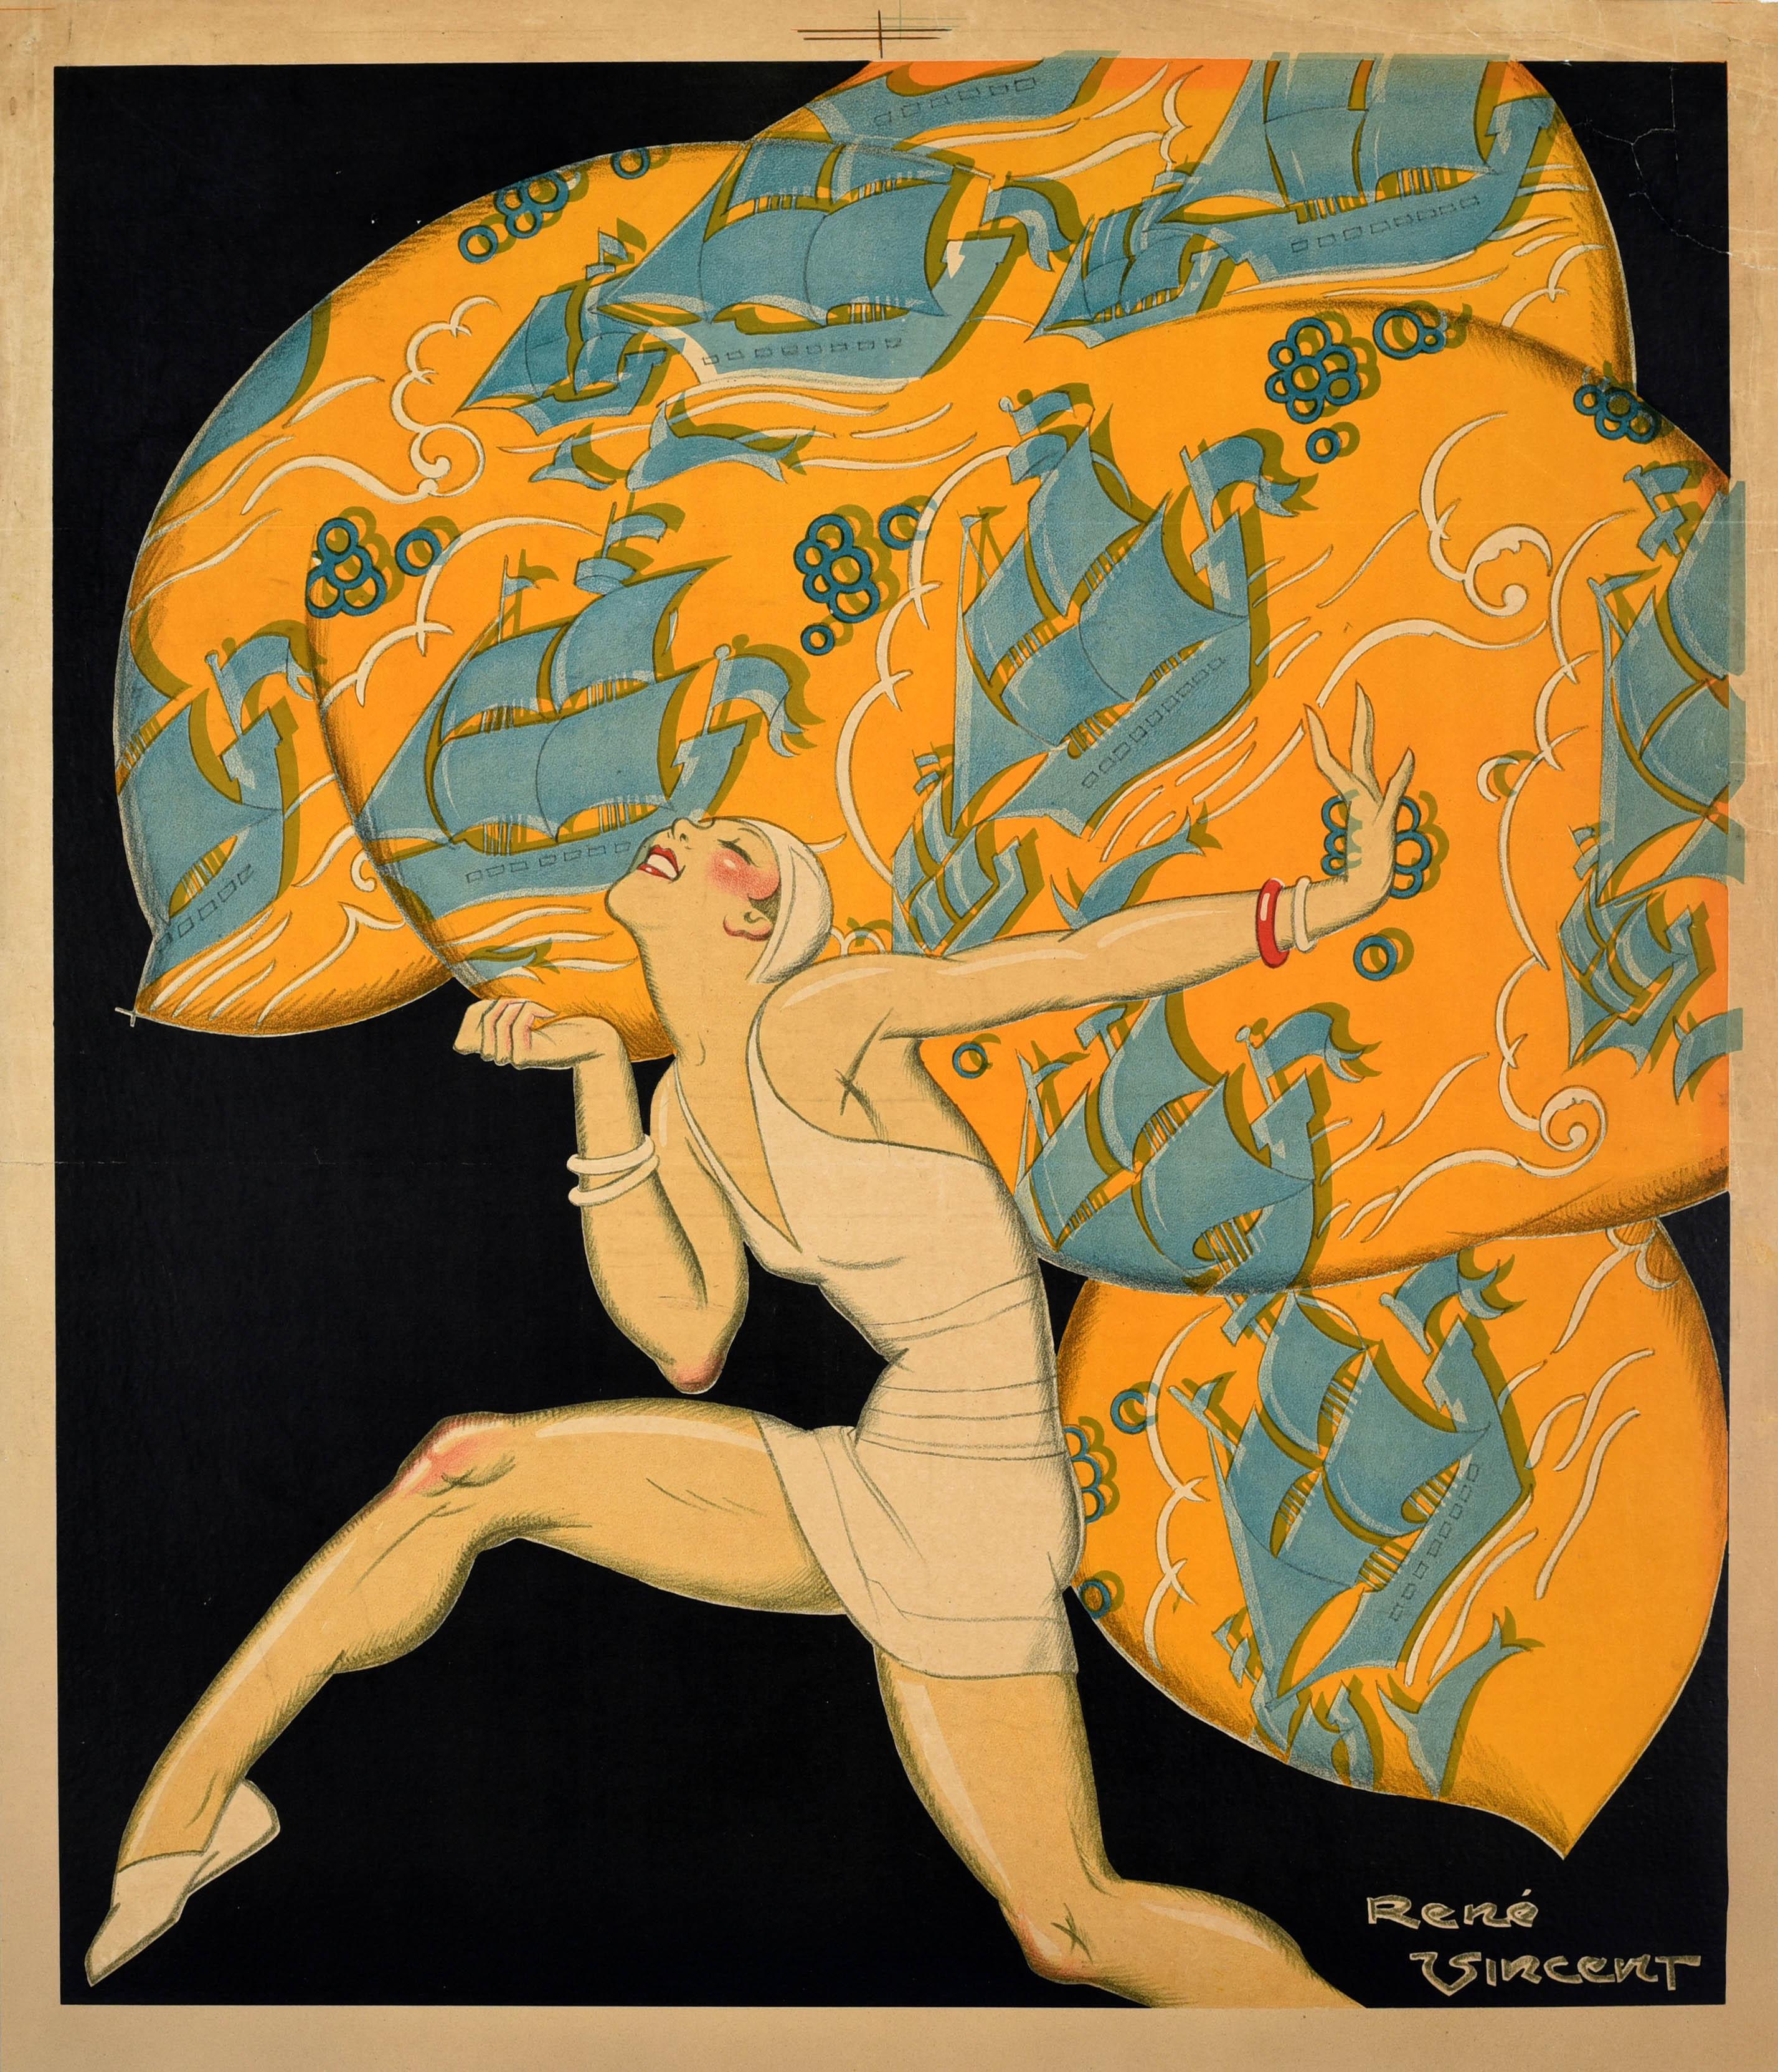 Original antique poster featuring a stunning design by the influential French Art Deco illustrator Rene Vincent (1879-1936) of a smiling lady wearing a fashionable bathing suit dancing in front of a yellow pattern with blue sailing ships and